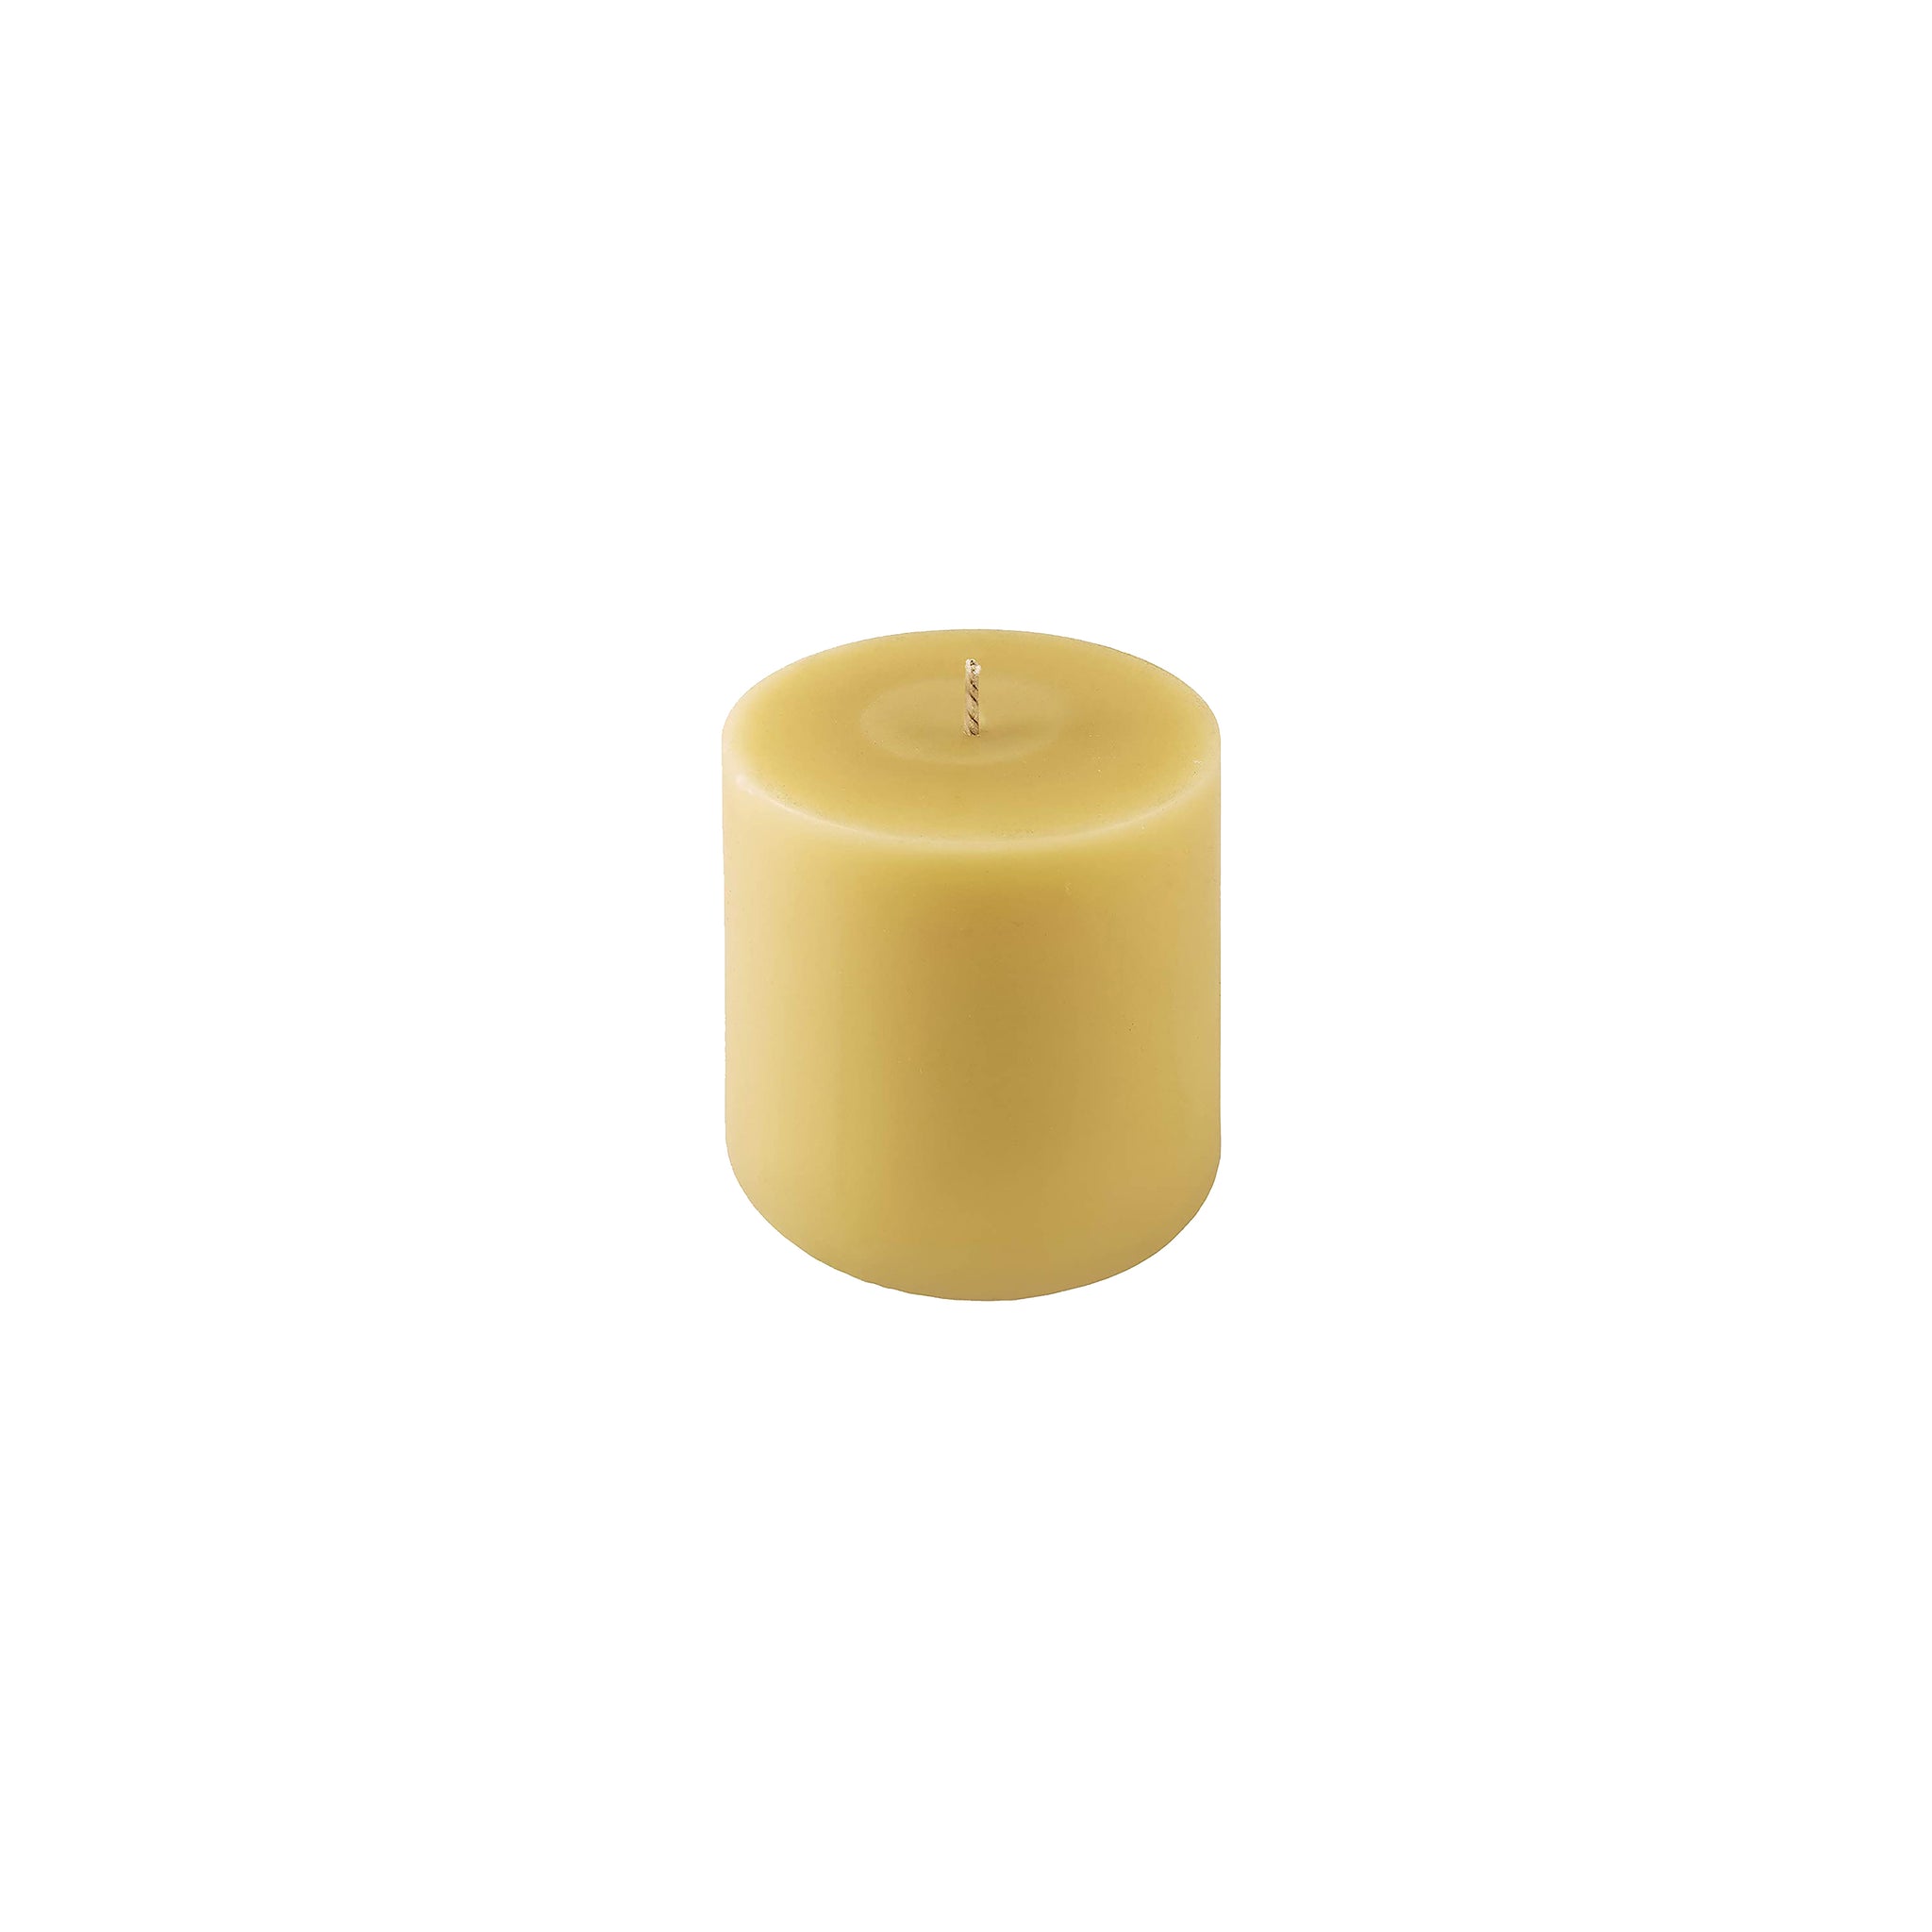 3-Wick Pure Beeswax Candle in Blown Glass - 22oz